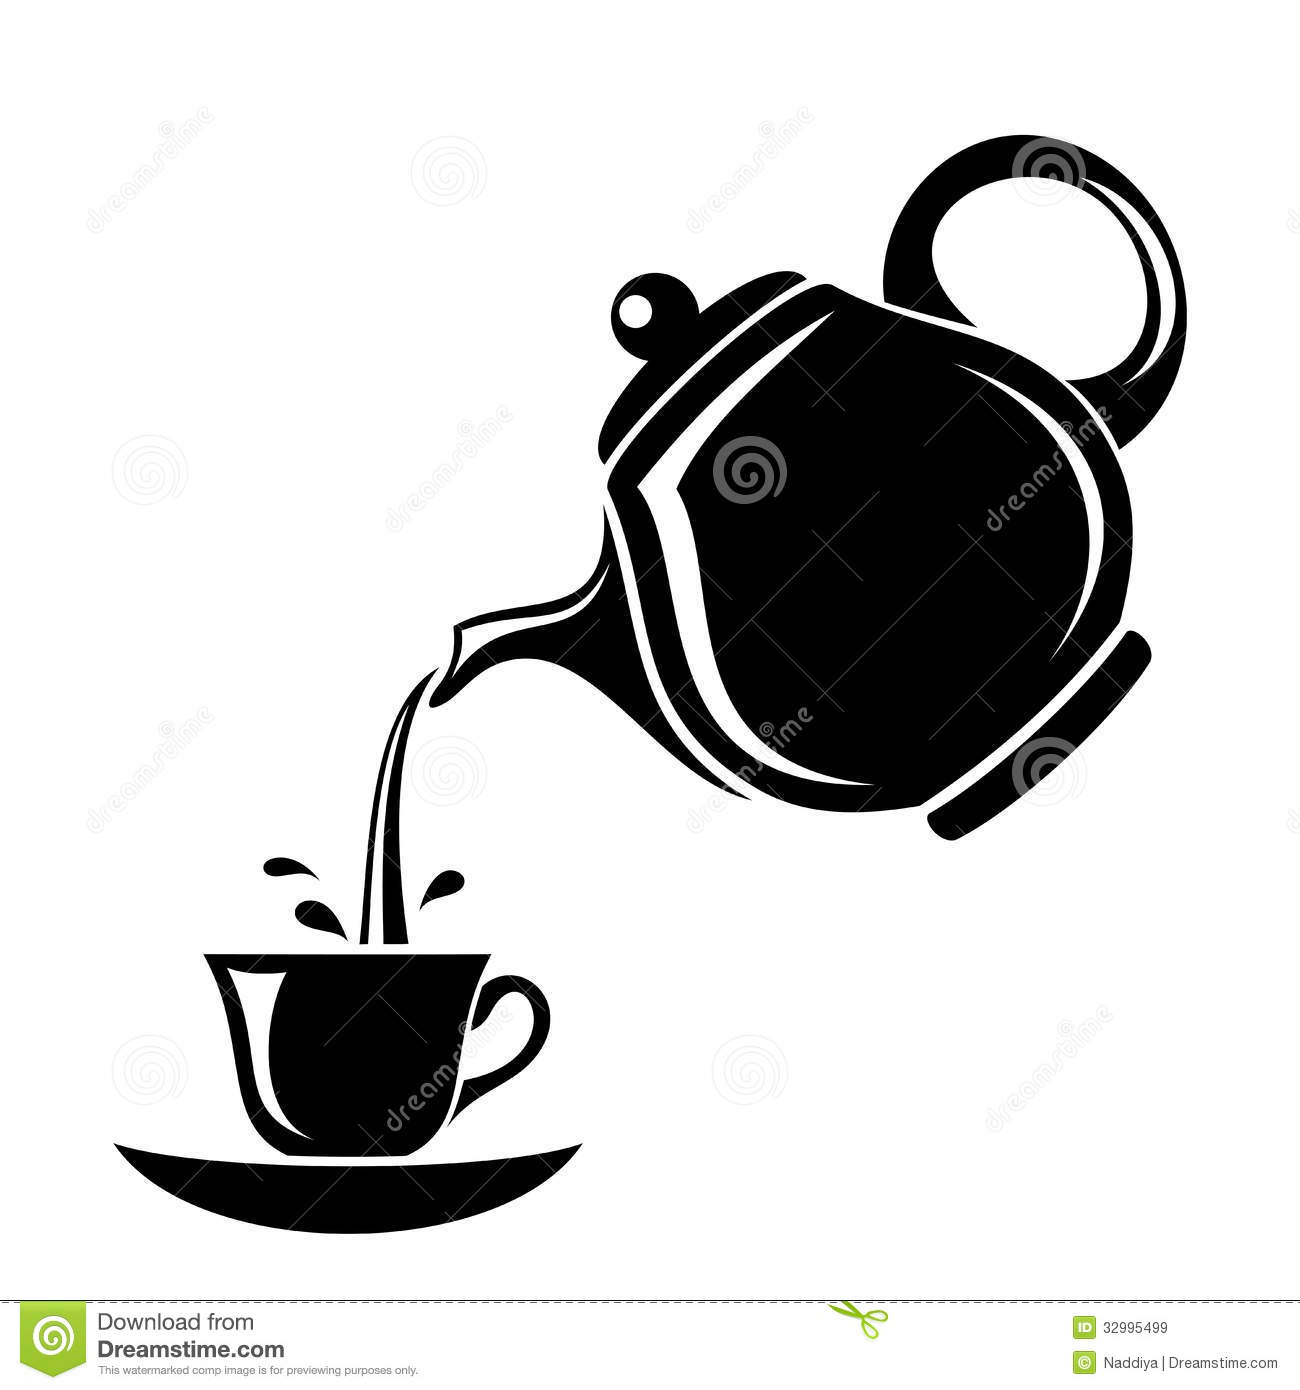 Black Silhouette Of Teapot And Cup  Royalty Free Stock Images   Image